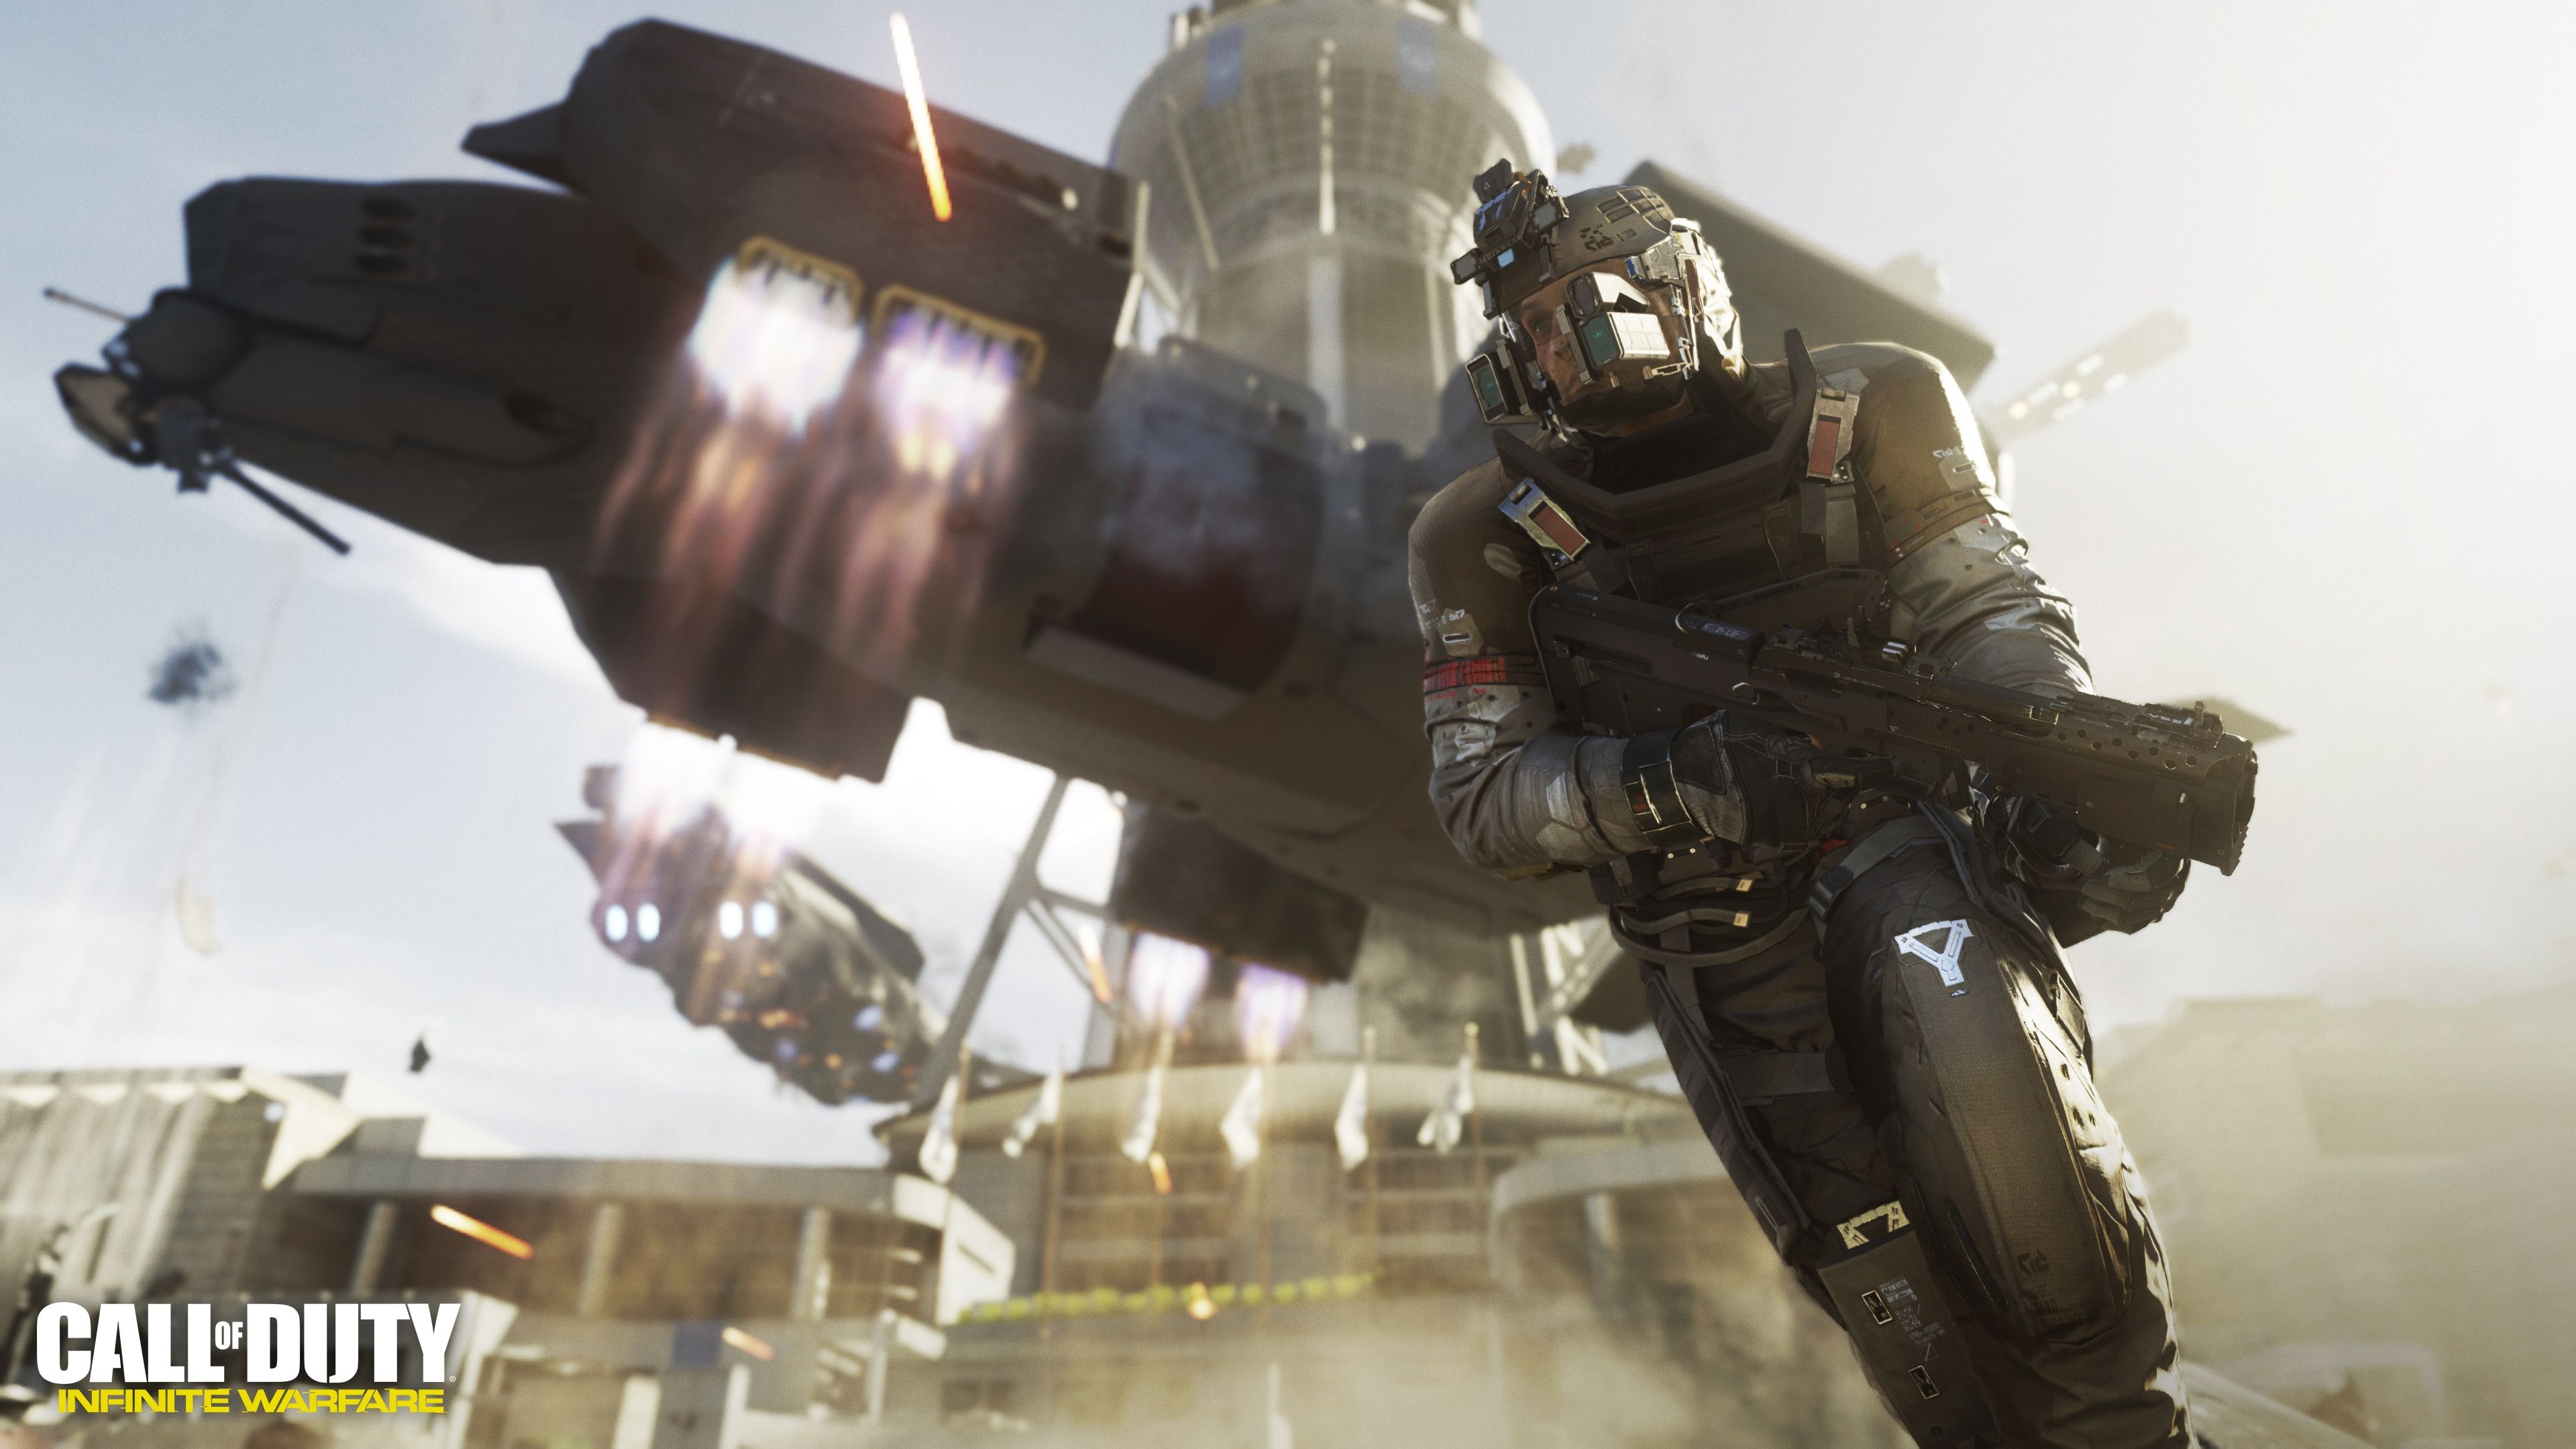 Call of Duty Infinite Warfare Gameplay Wallpaper in jpg format for free download